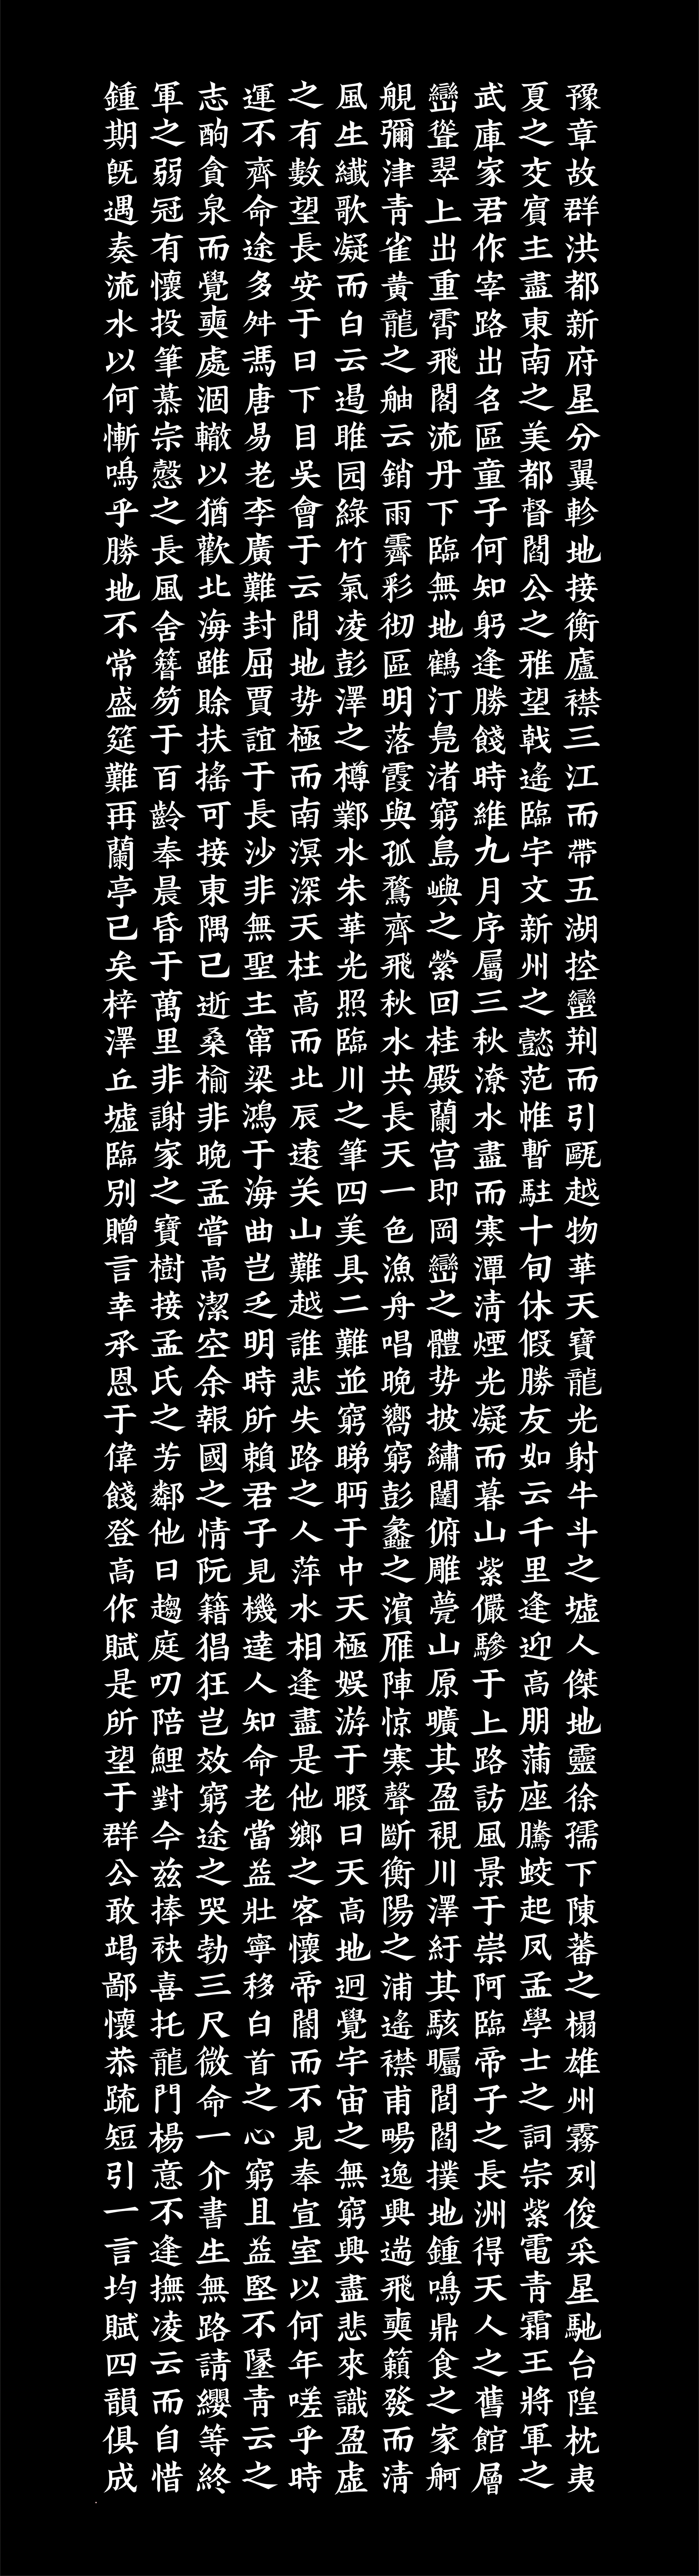 Here are the traditional Chinese characters you want.